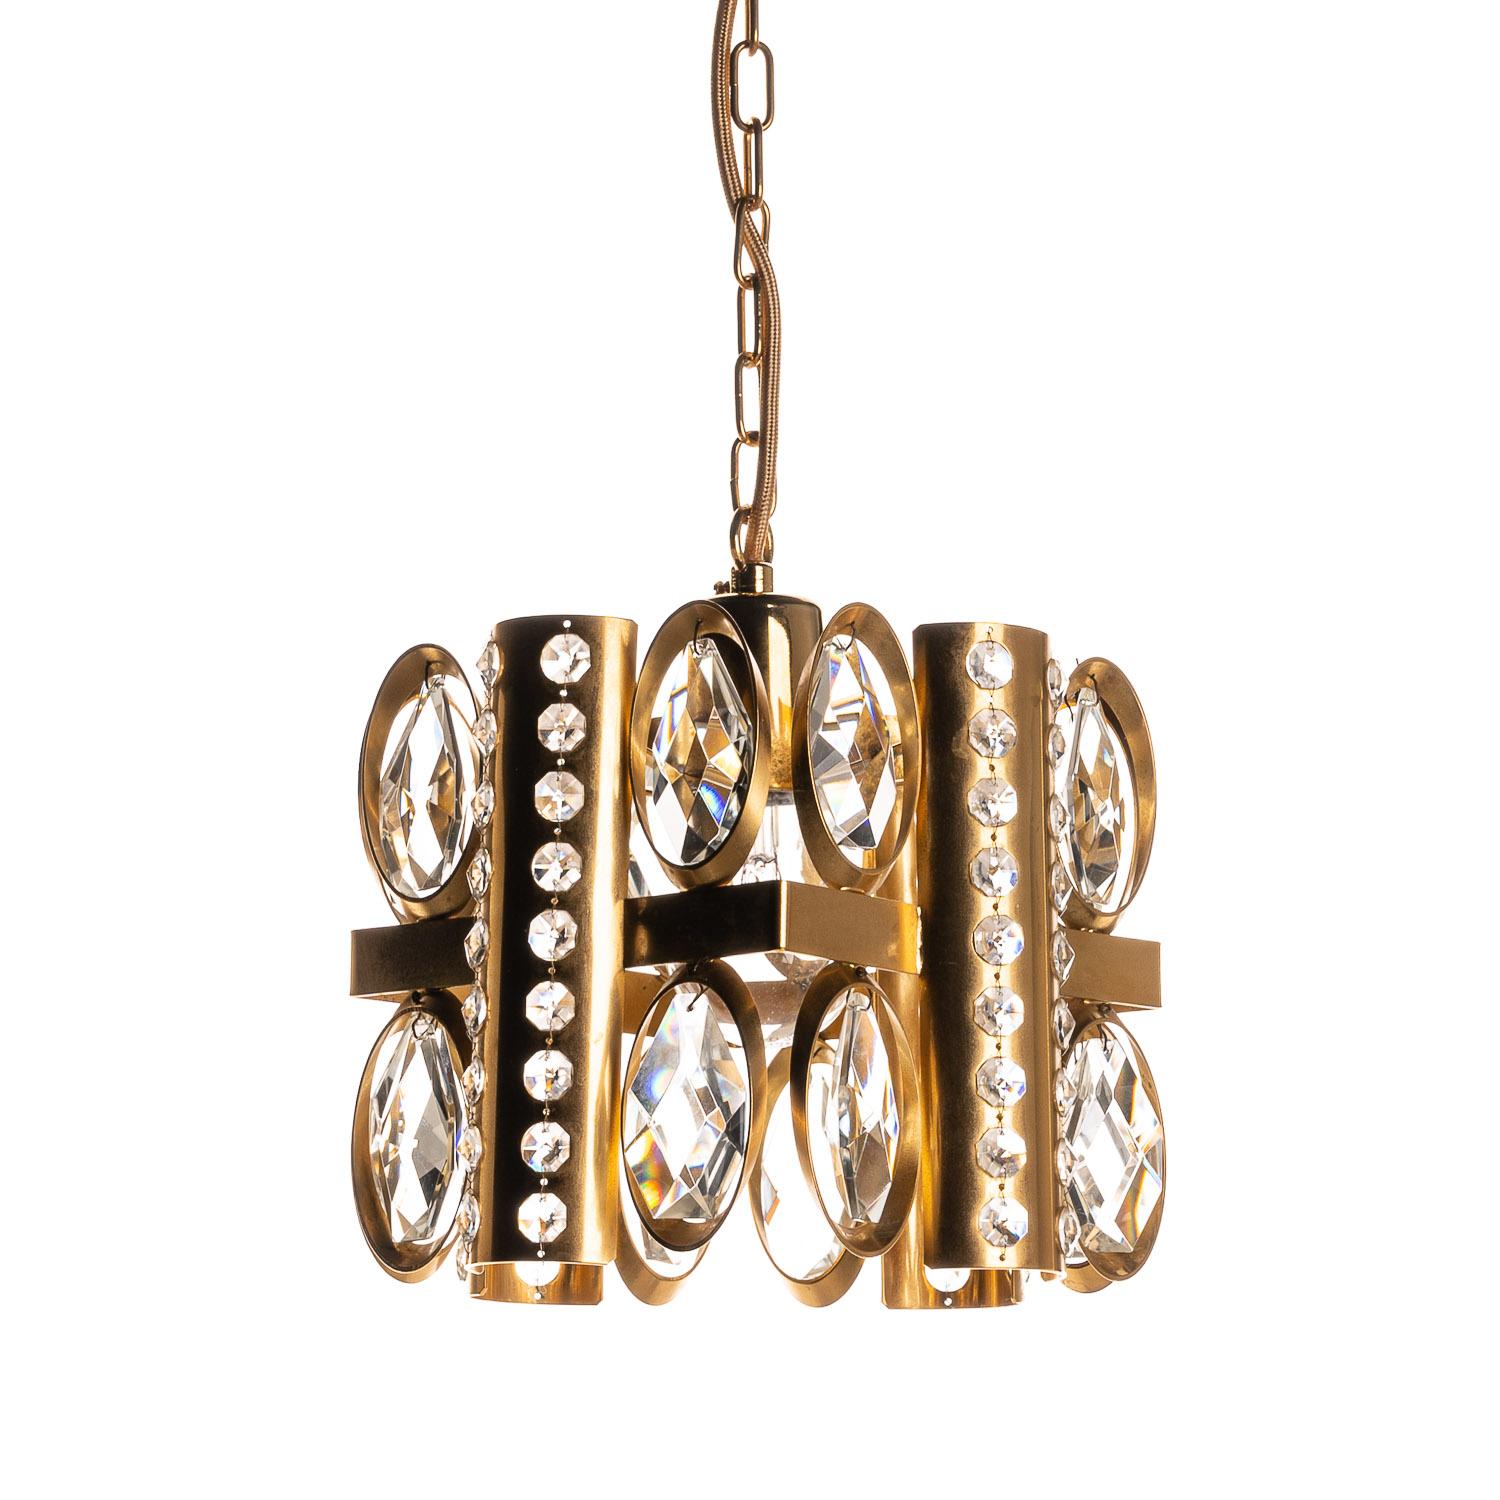 This is a stunning example of a Palwa 1950s chandelier. Newly wired and given fresh fittings, this pristine example adds a feeling of opulence and glamour to any space. This piece sparkles in its own presence and can be bought as a single unit or a